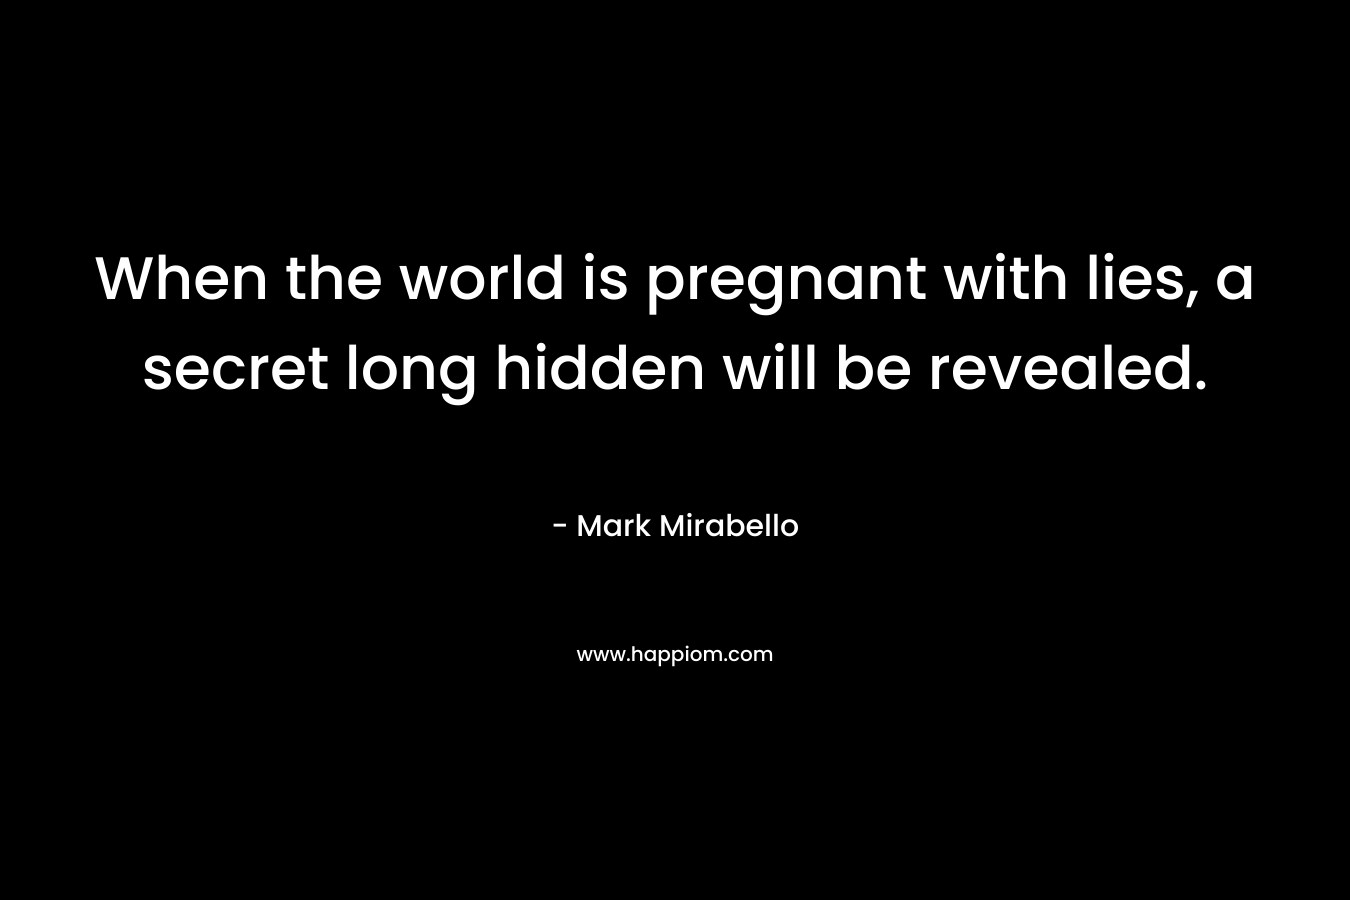 When the world is pregnant with lies, a secret long hidden will be revealed.